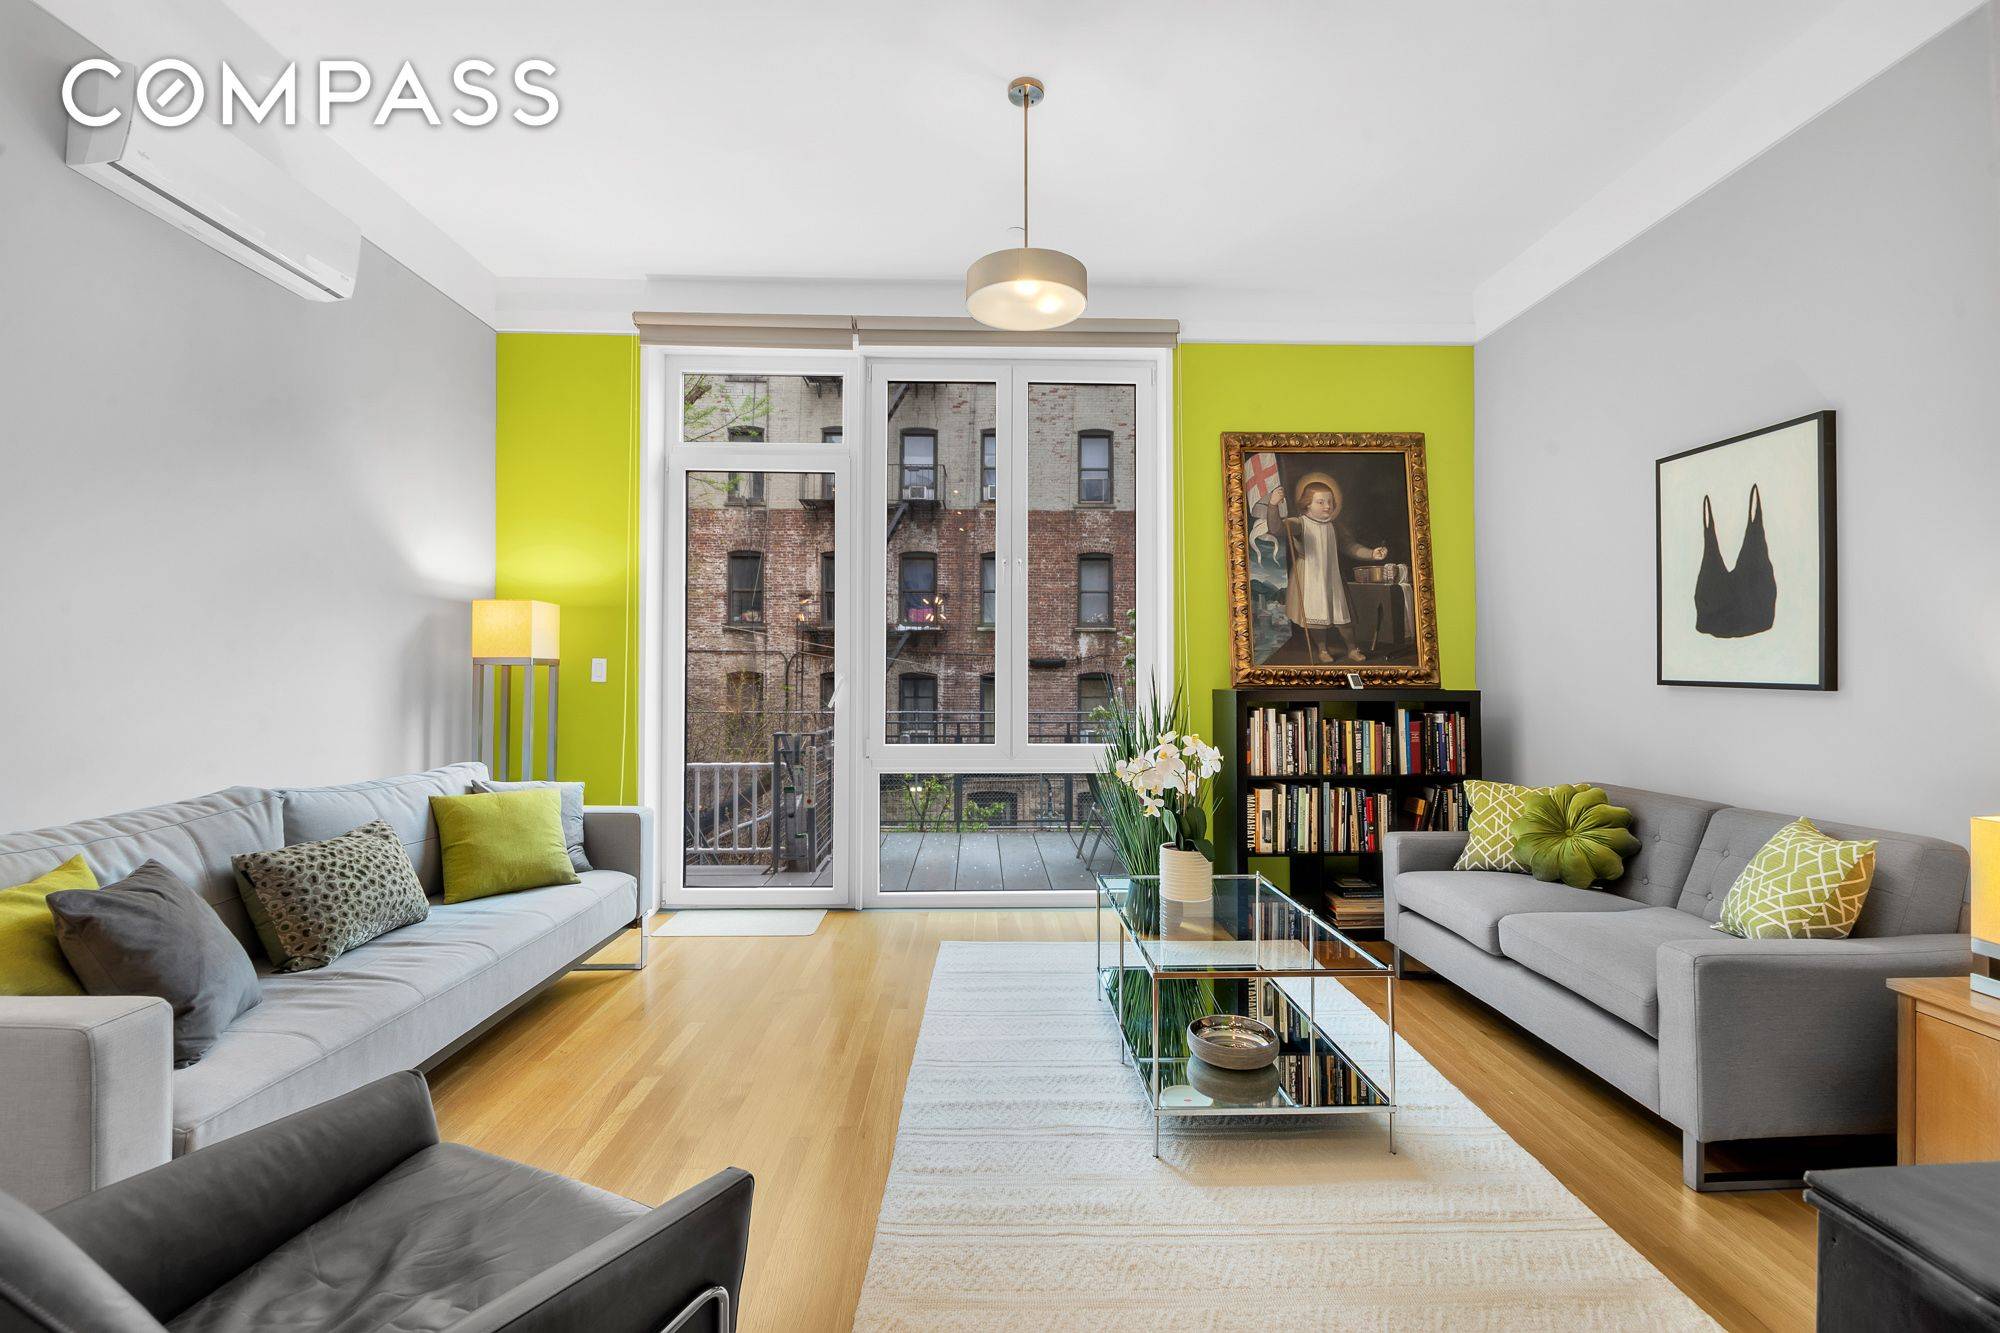 Welcome to this stunning, contemporary and completely gutted multi family townhome located at 22 East 129th St.